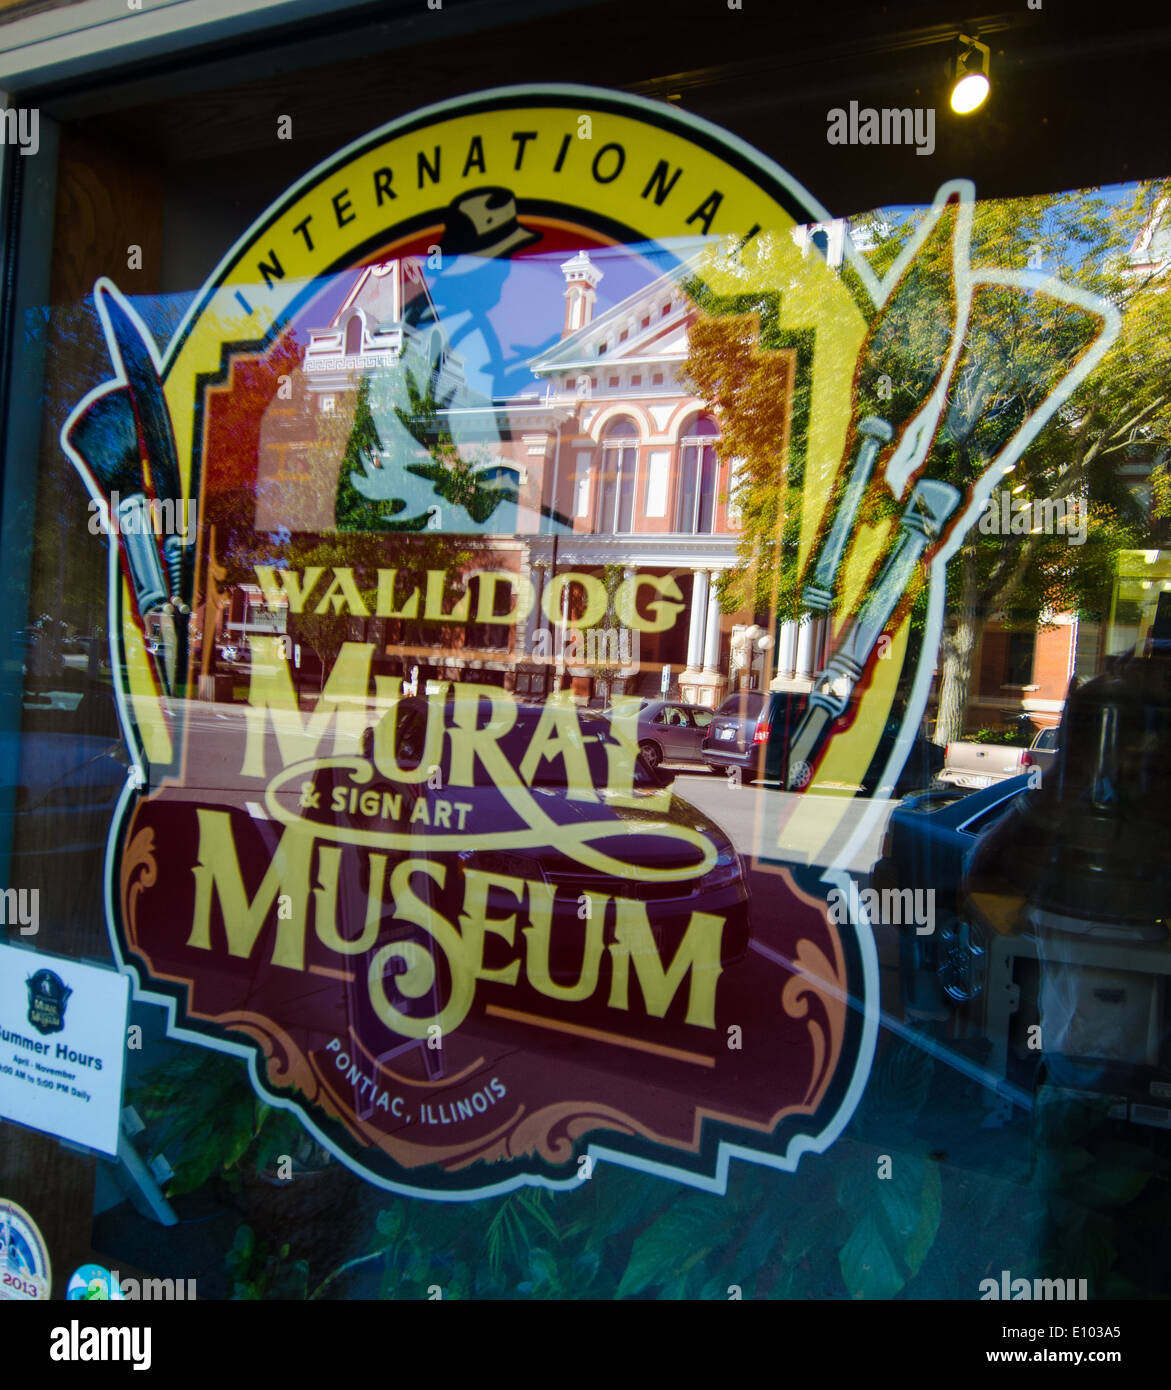 Sign for the Walldog Mural Museum in Pontiac, Illinois, a town along Route 66 Stock Photo